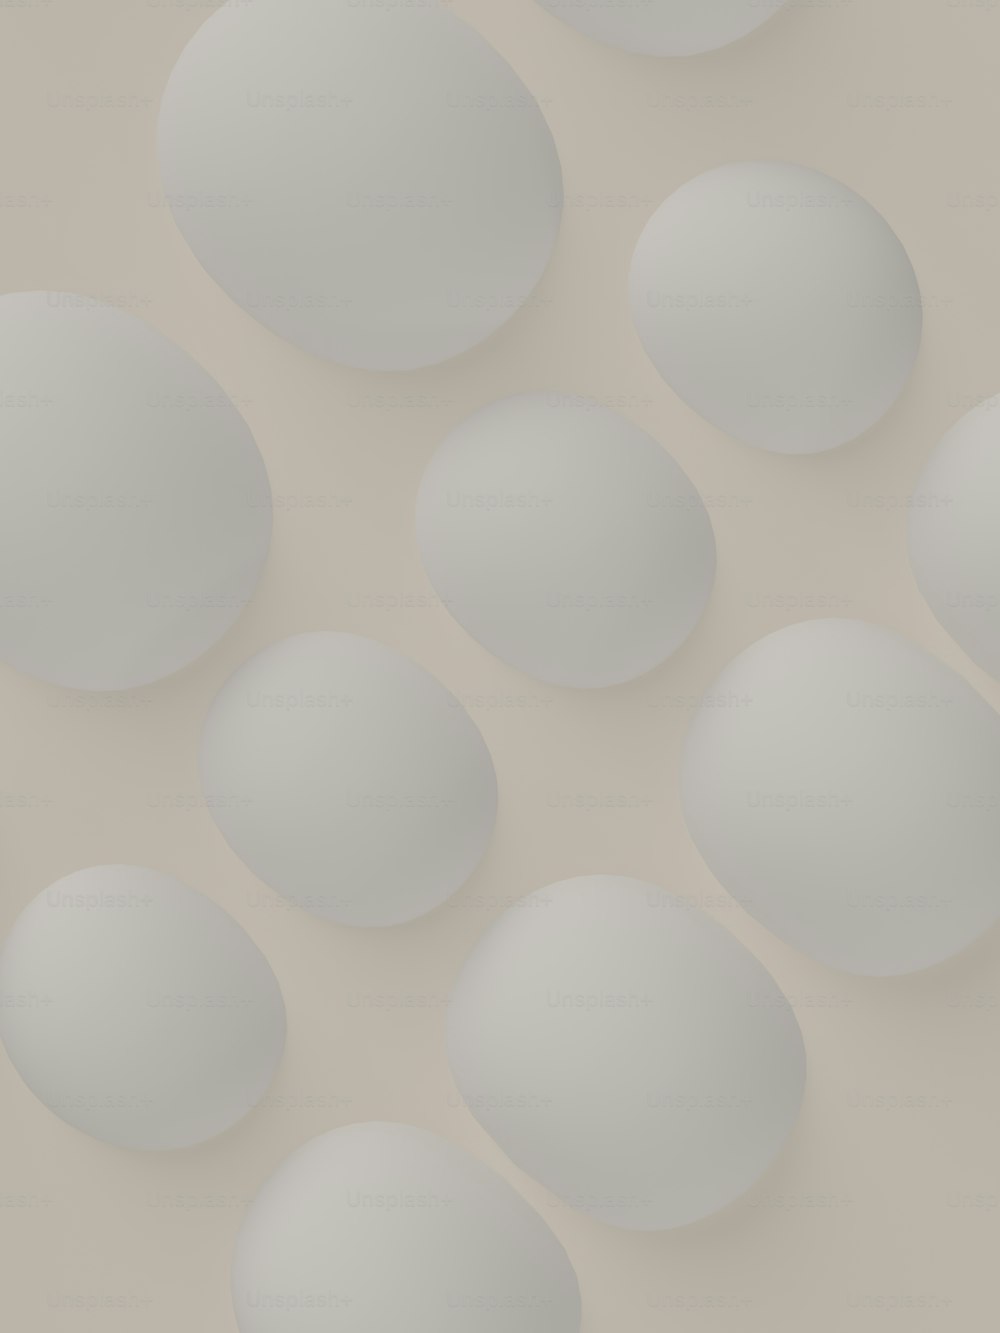 a bunch of white eggs sitting on top of a table